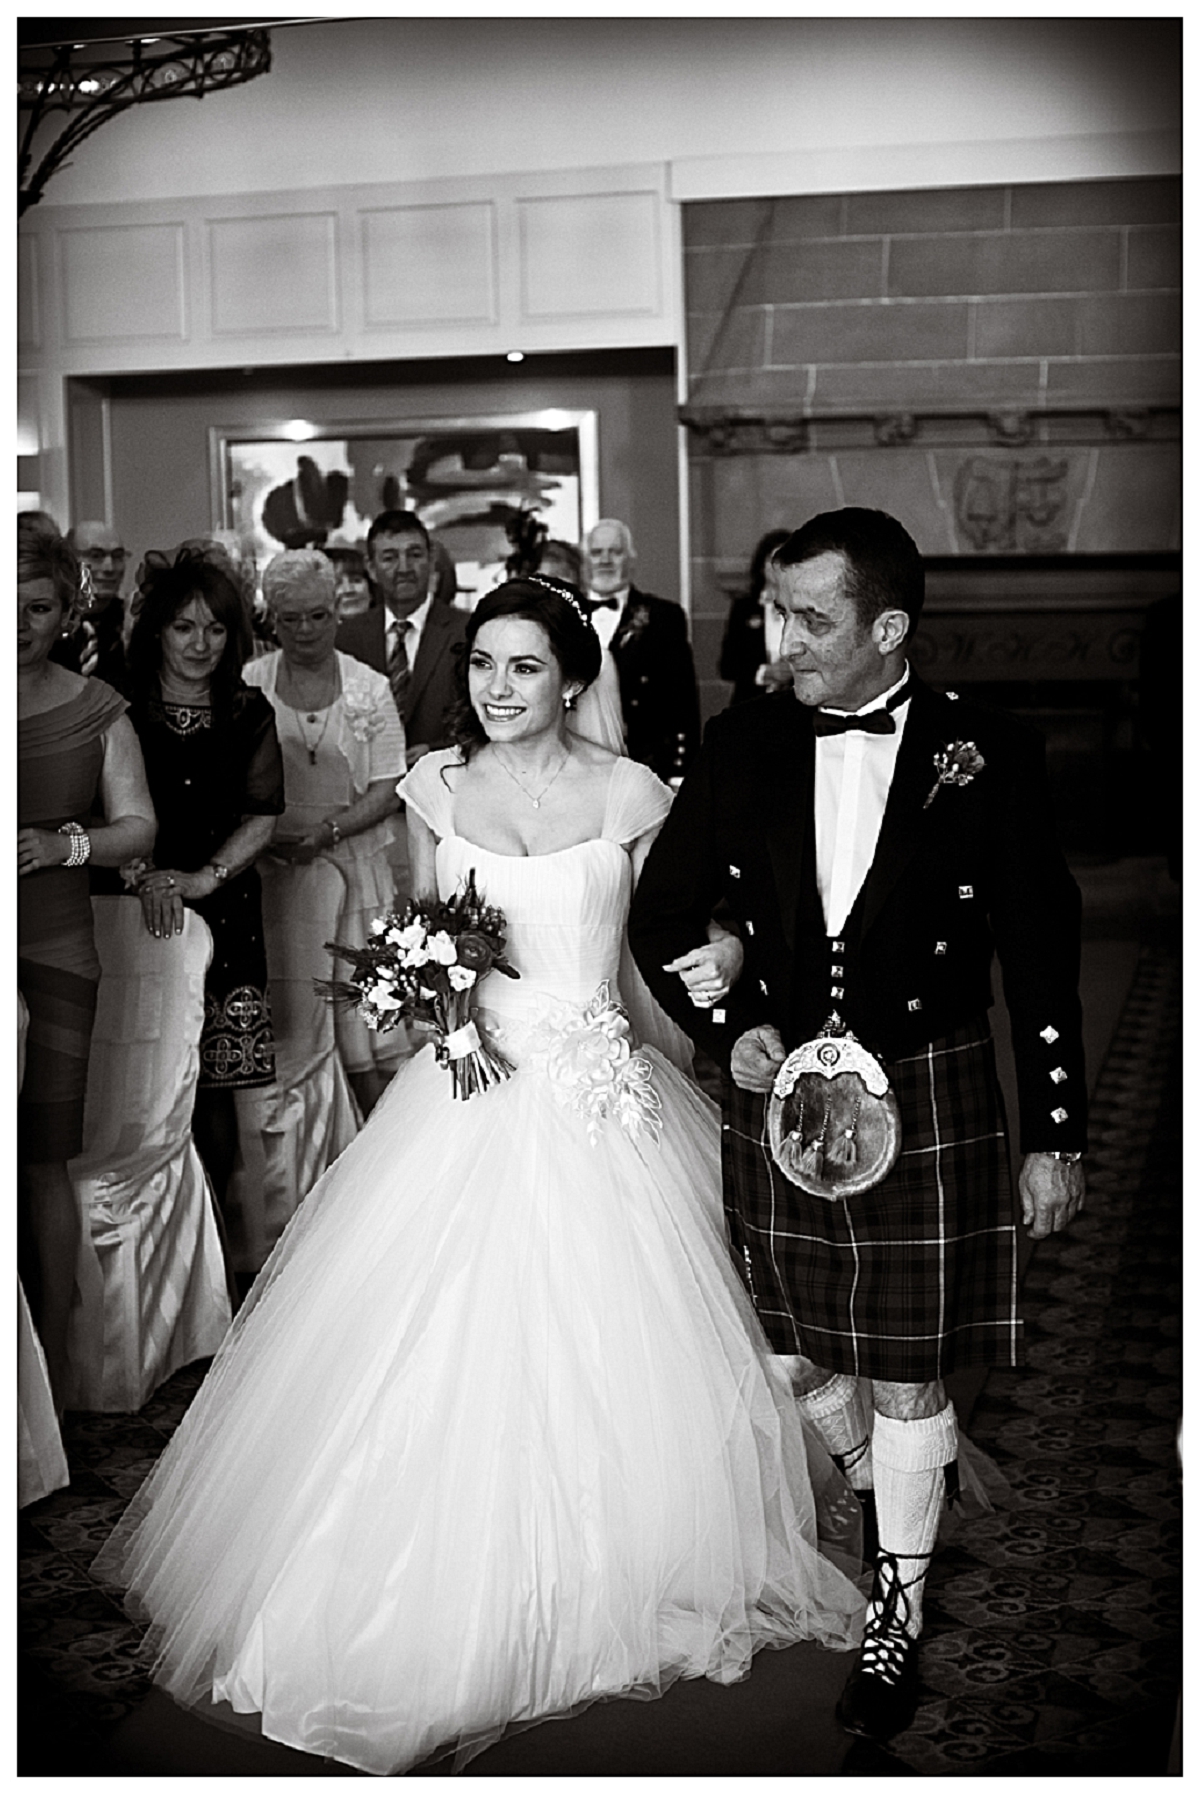 Tangled up in love! A gorgeous scottish wedding!